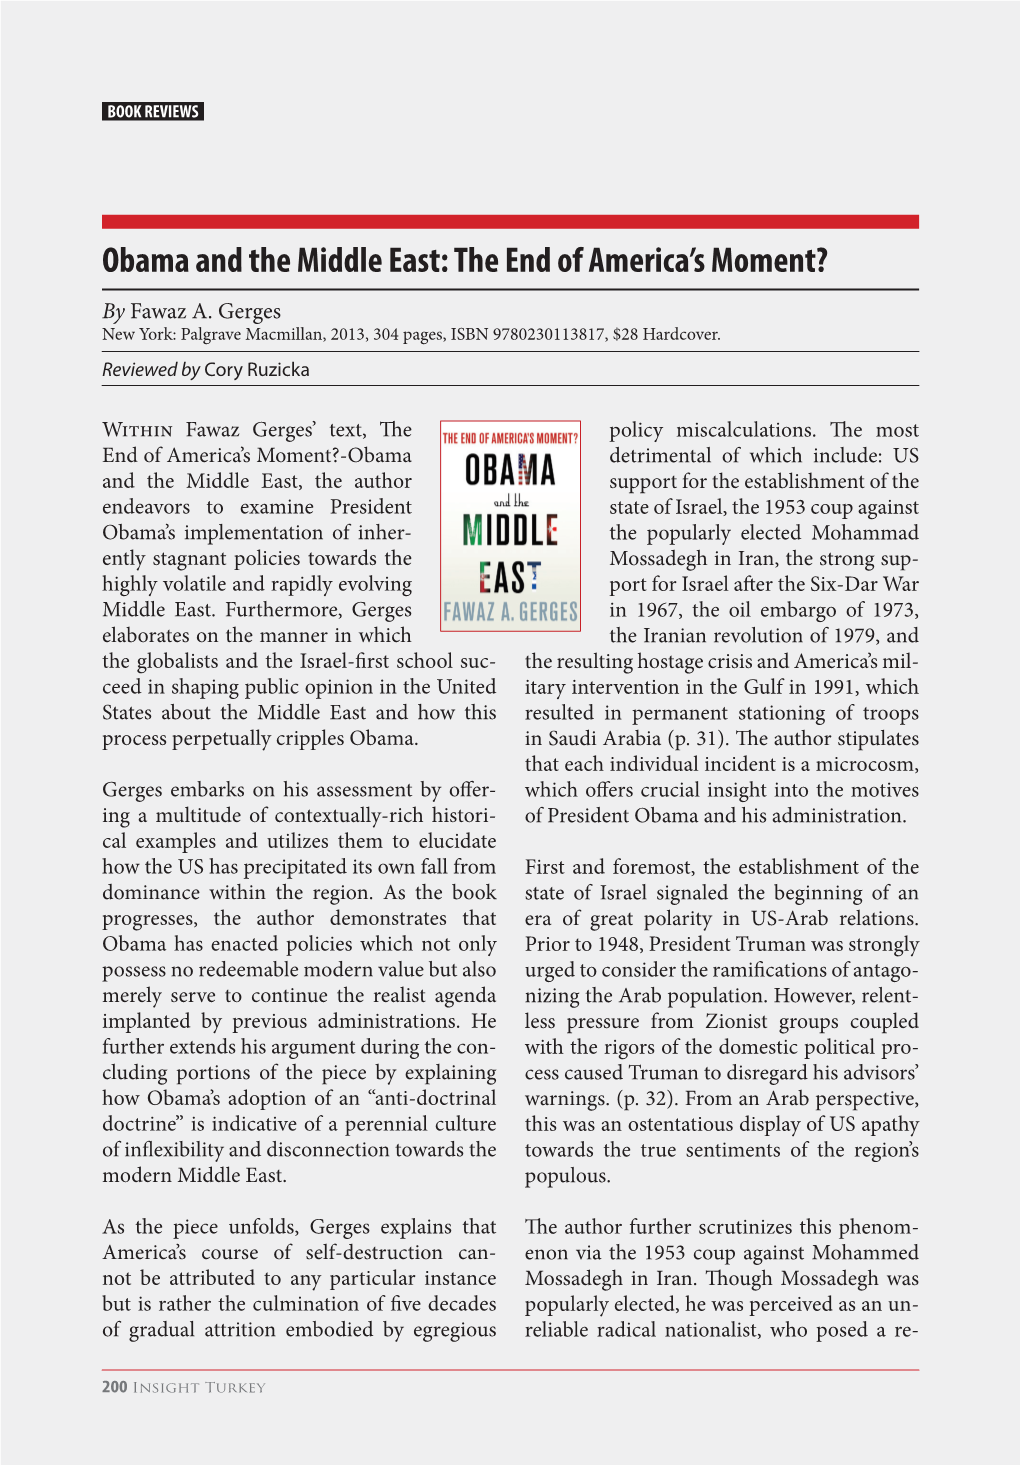 Obama and the Middle East: the End of America’S Moment? by Fawaz A